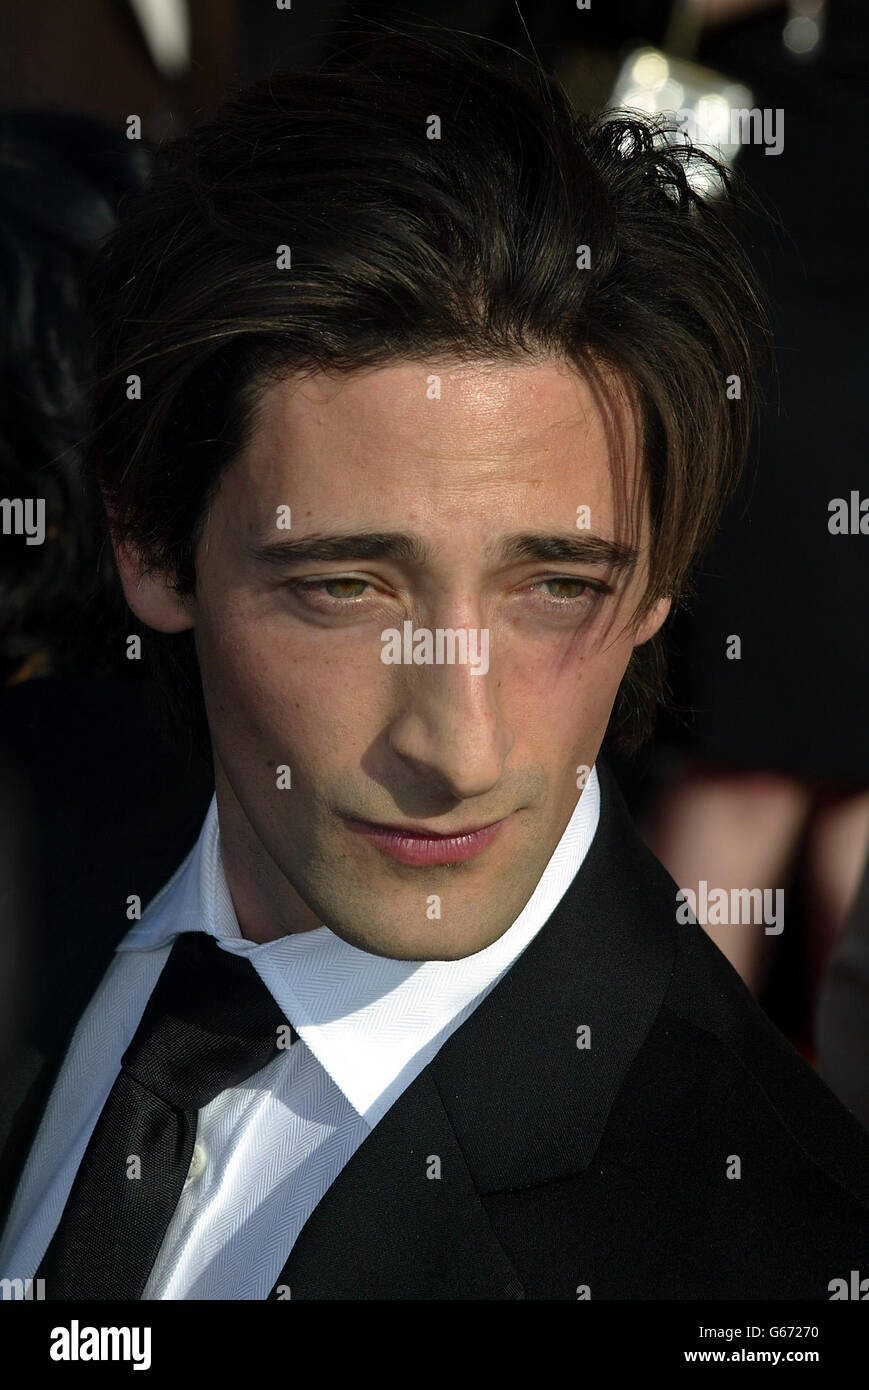 Actor Adrien Brody arrives on the red carpet at the 9th annual Screen Actors Guild Awards at the Shrine Auditorium in Los Angeles. Stock Photo